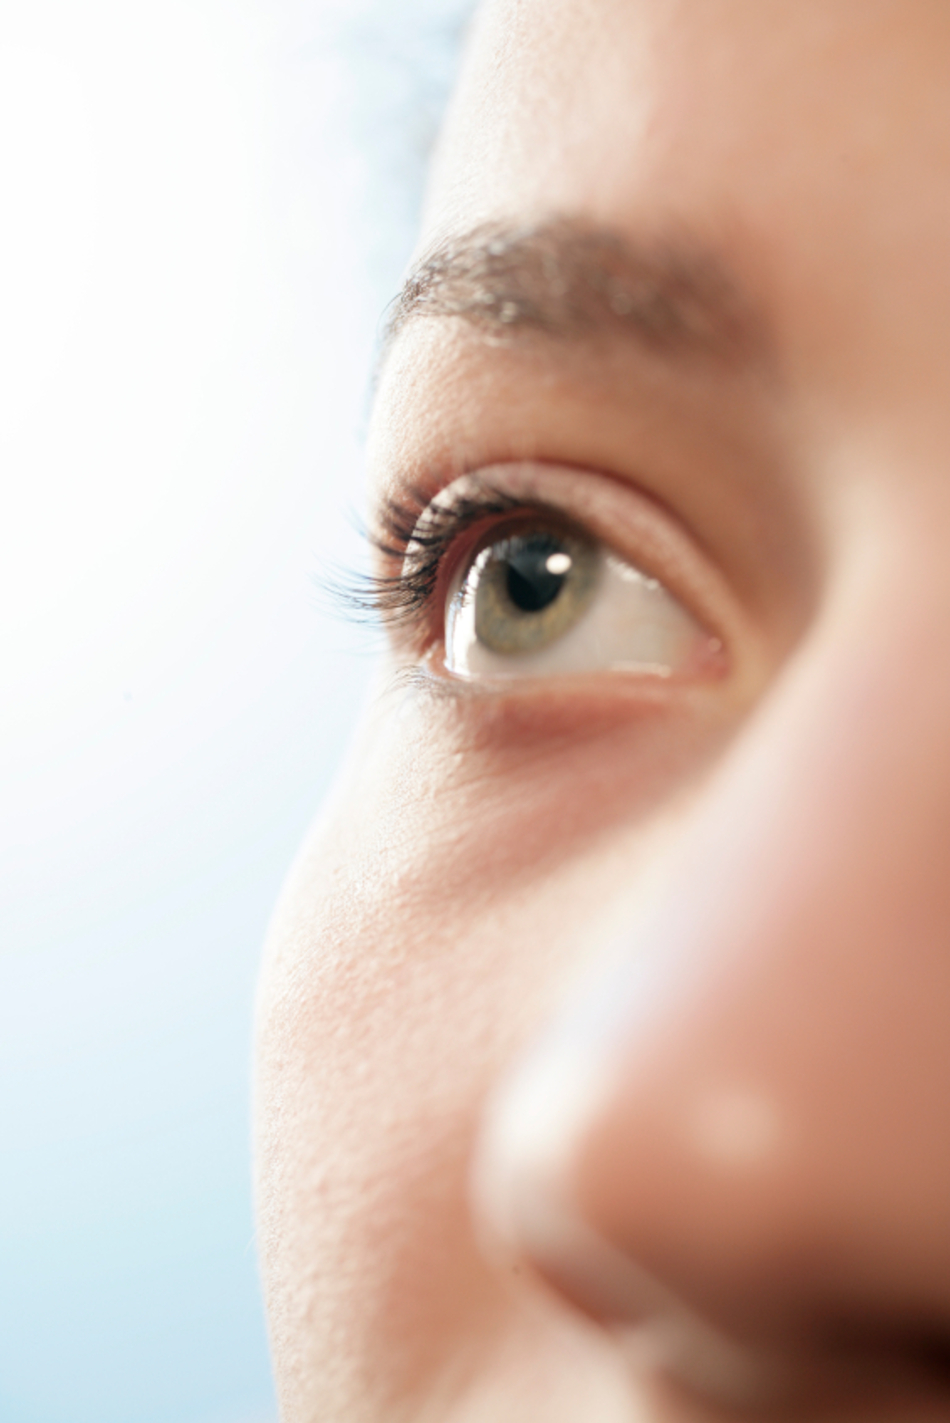 Changing Vision? How to Make Sure Your Eyes are Healthy